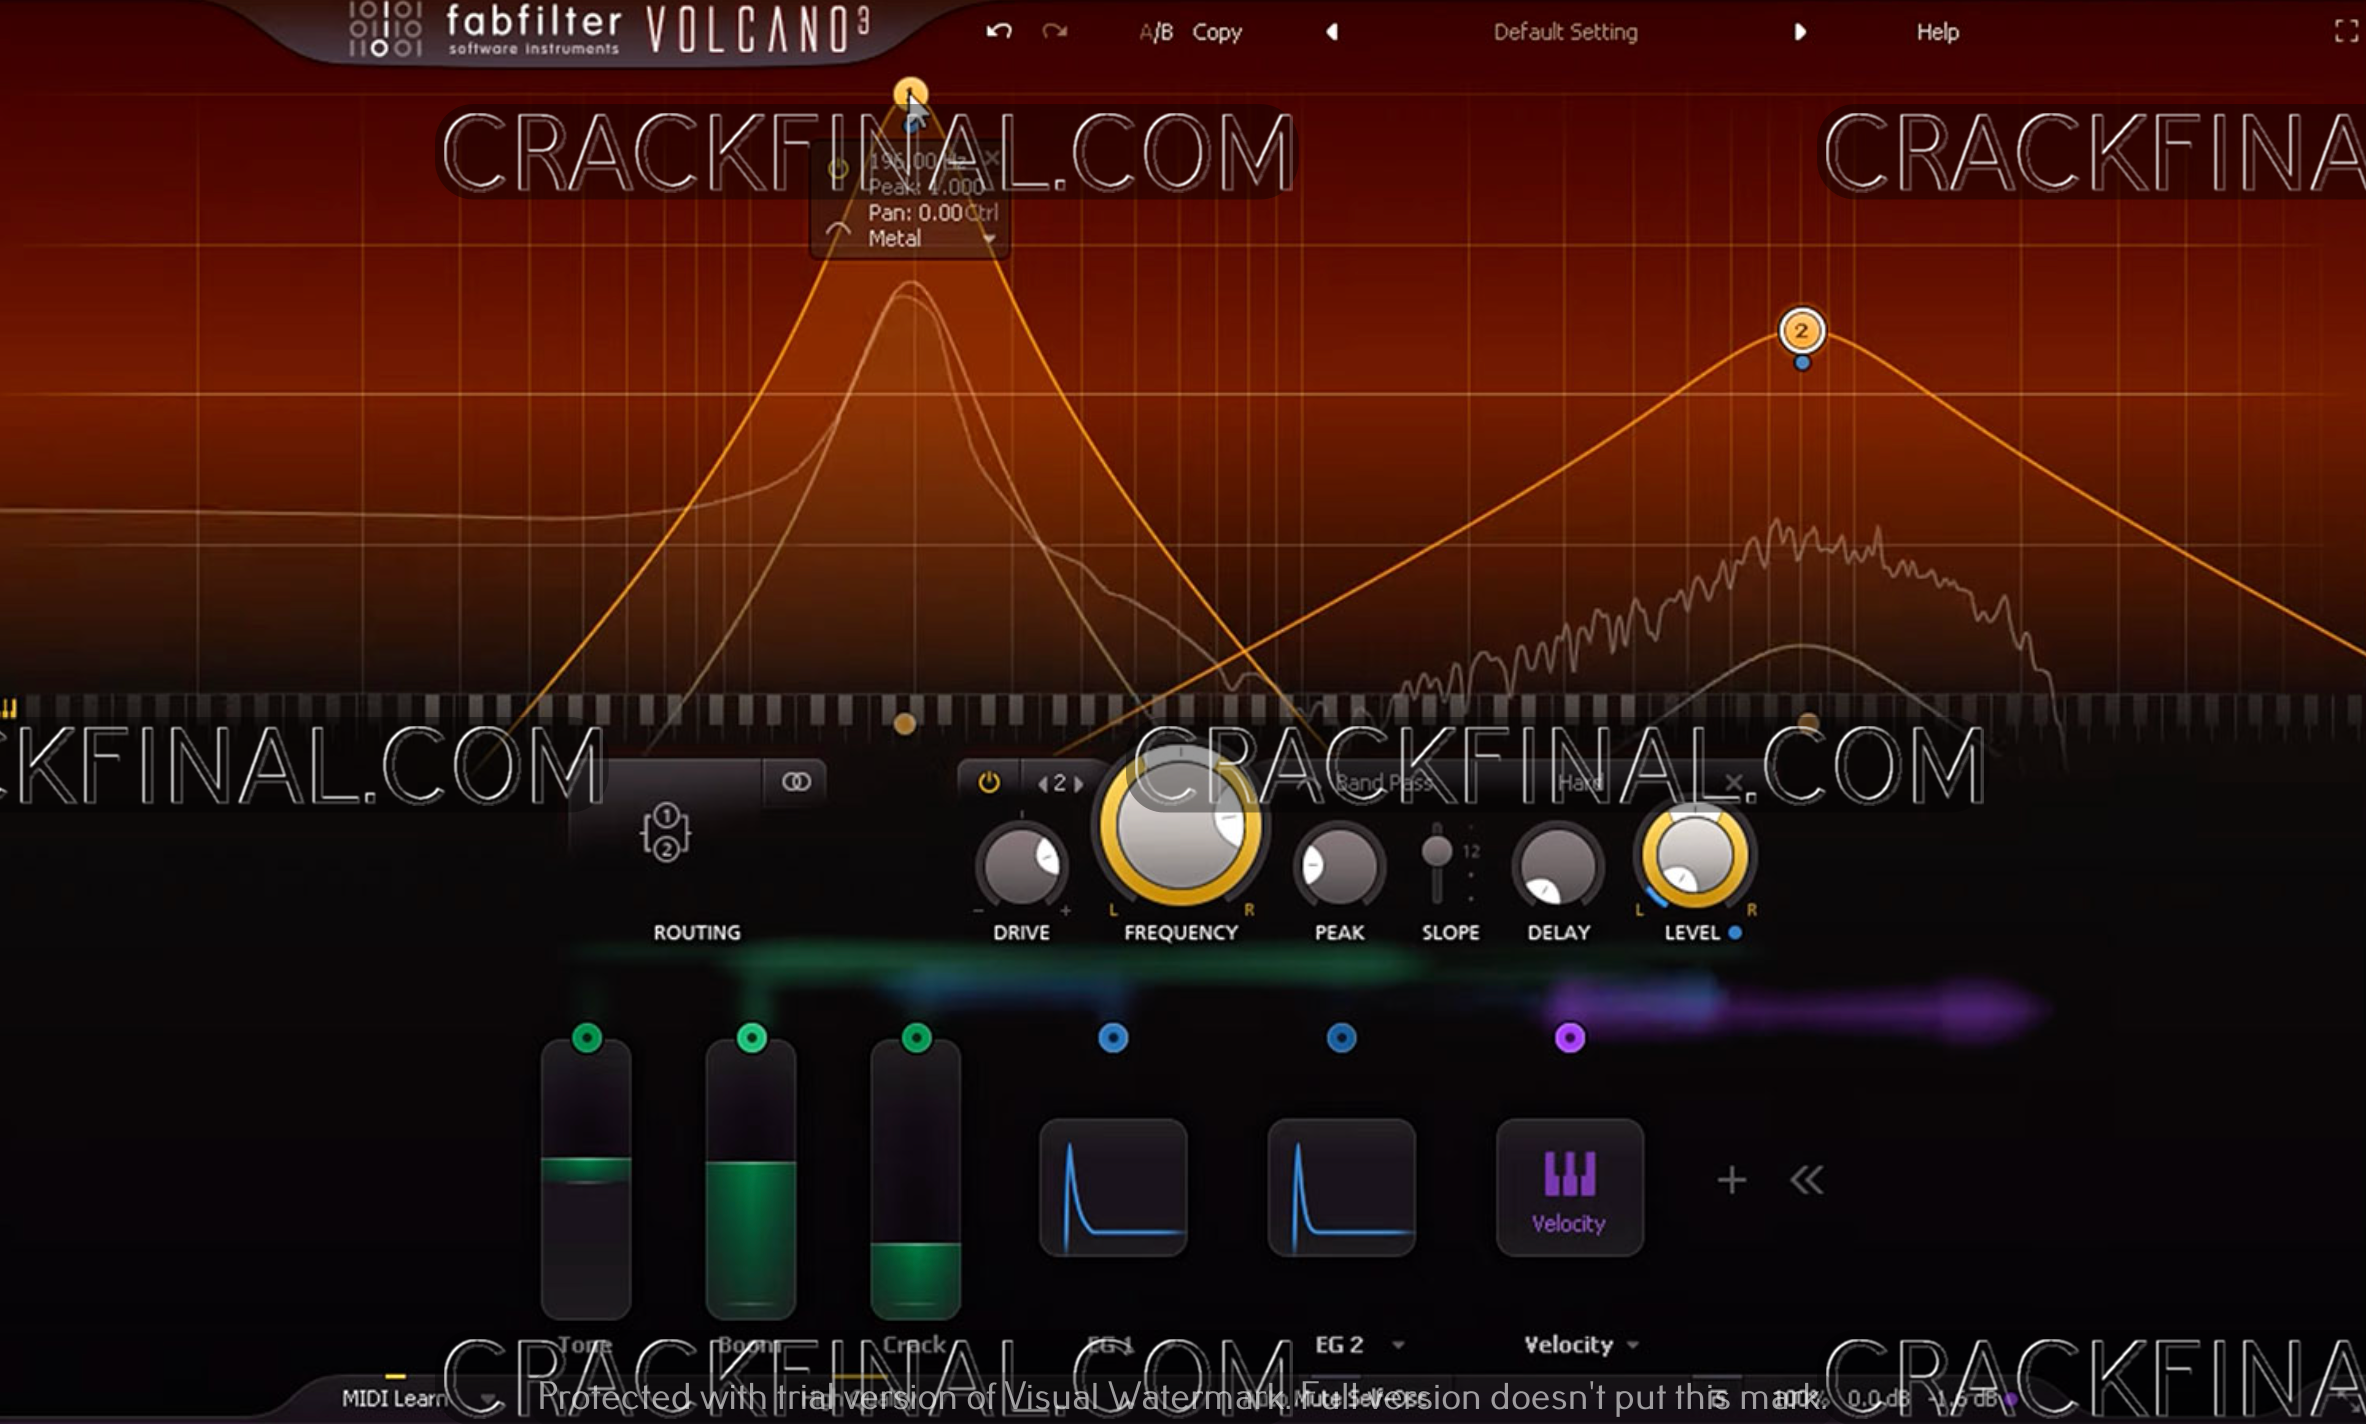 Free License Key For Fabfilter